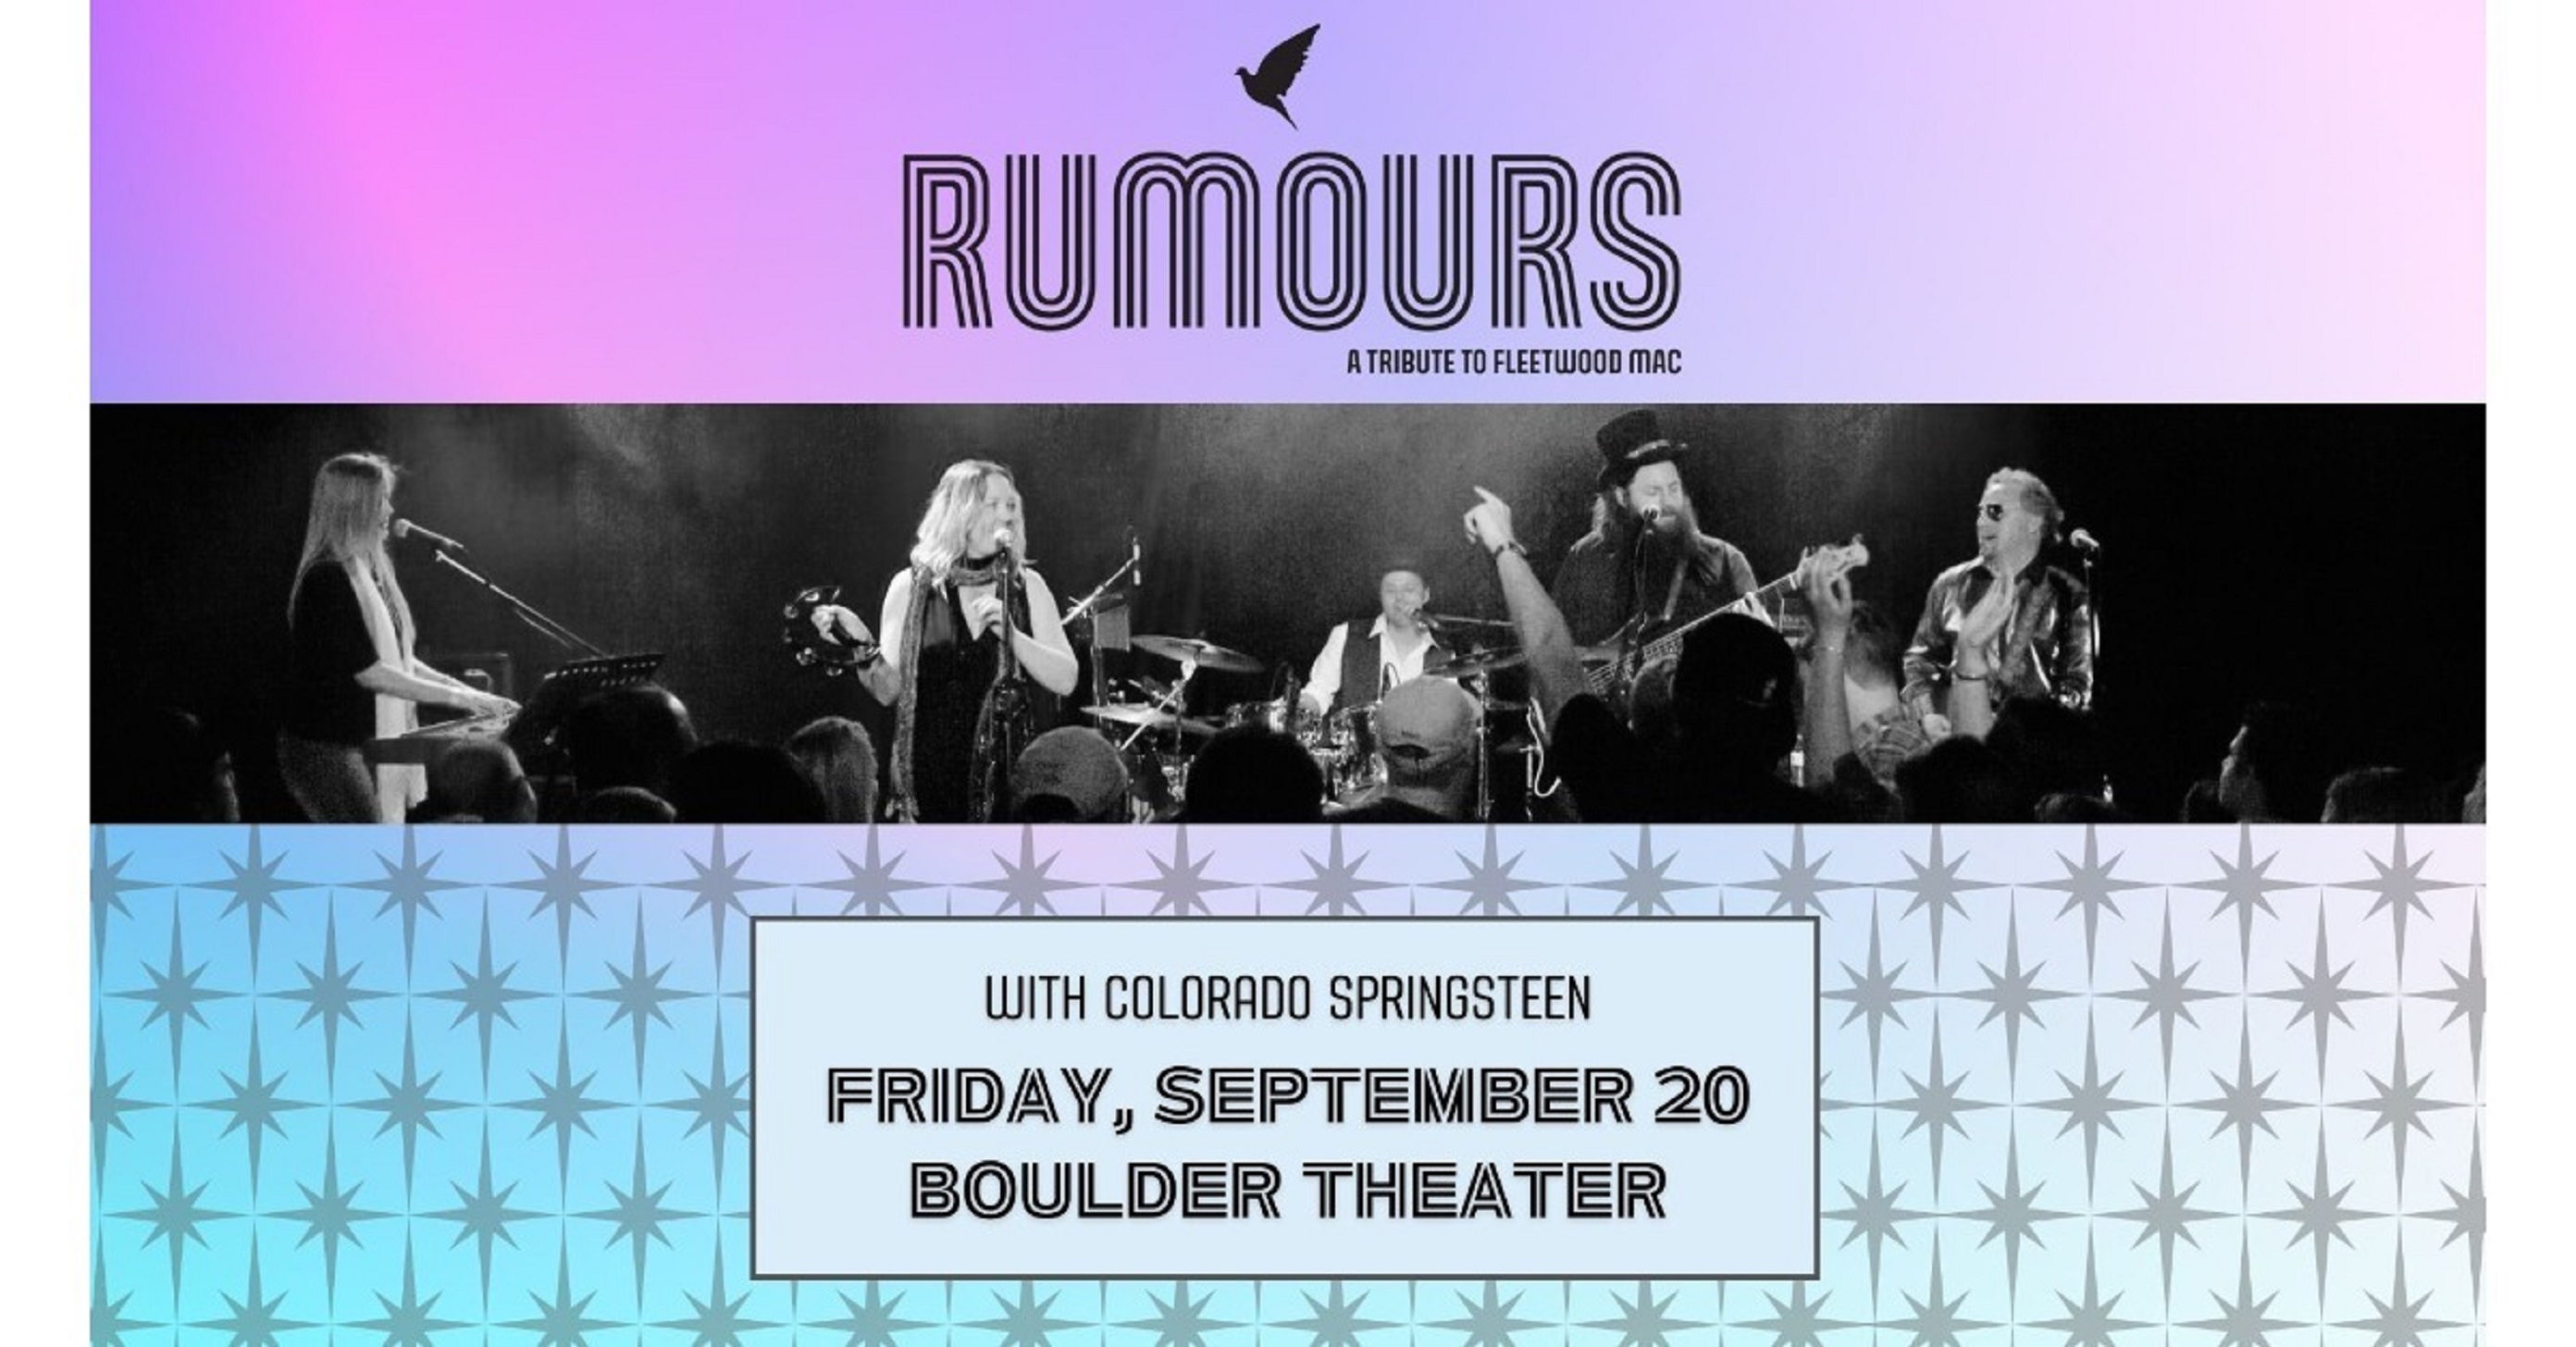 Rumours: A Tribute to Fleetwood Mac Set to Captivate Boulder Theater